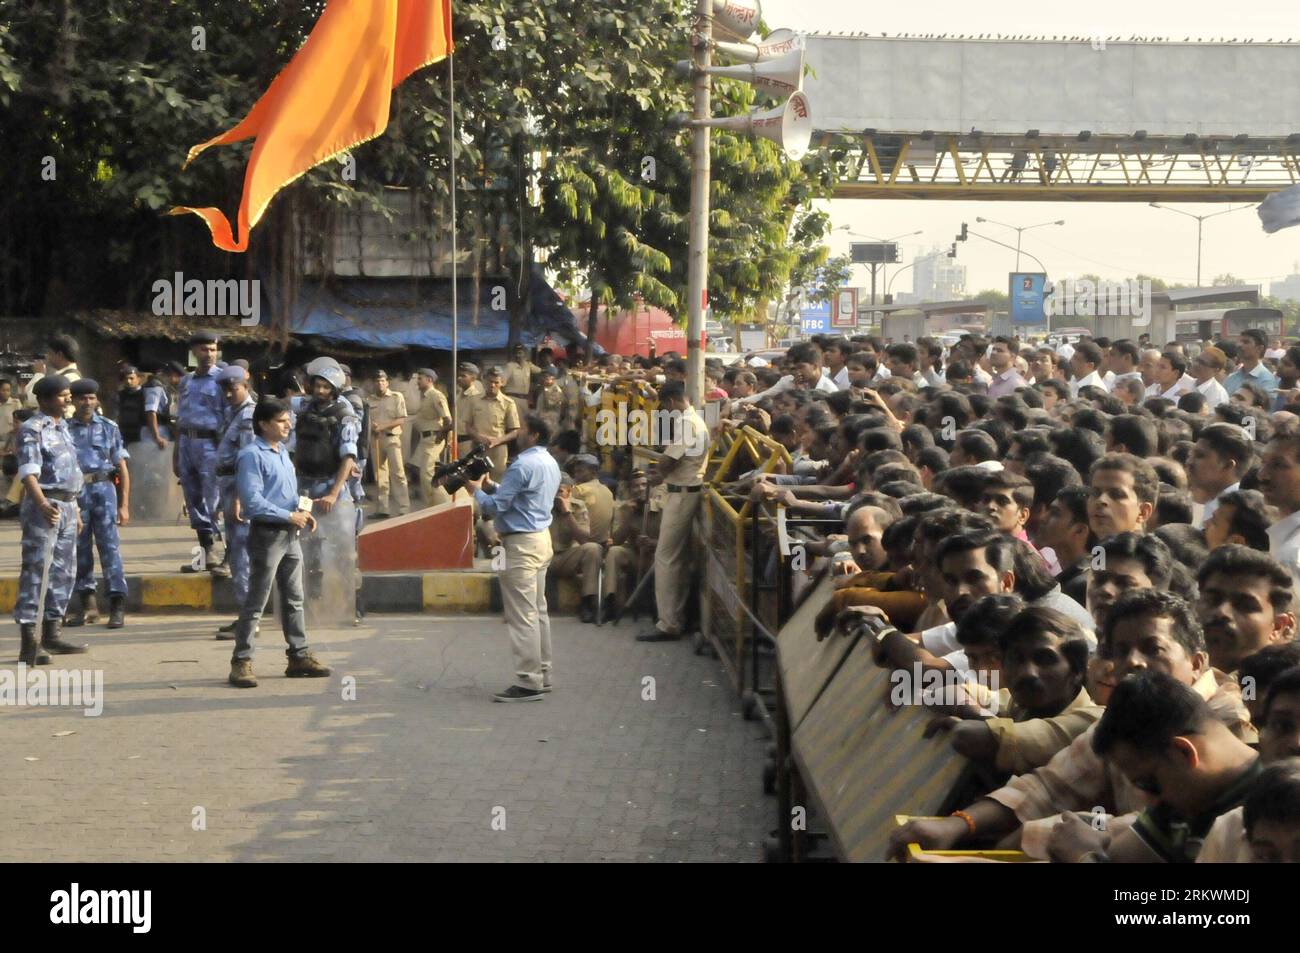 Bildnummer: 58709600  Datum: 15.11.2012  Copyright: imago/Xinhua Supporters of Bal Thackeray gather near his residence in Mumbai, India, on Nov. 15, 2012. India s Hindu extremist leader BalxThackeray was confirm to be in critical condition by his family Thursday. Large crowd of supporters gathered outside the residence of BalxThackeray, 86-year-old founder of the Shiv Sena Party, in Mumbai. The secuity was leveled up and many stores shut down temporarily in case of any unrest. (Xinhua/Wang Ping) (srb) INDIA-MUMBAI-POLITICS-HEALTHxTHACKERAY PUBLICATIONxNOTxINxCHN Gesellschaft Politik Polizei Po Stock Photo